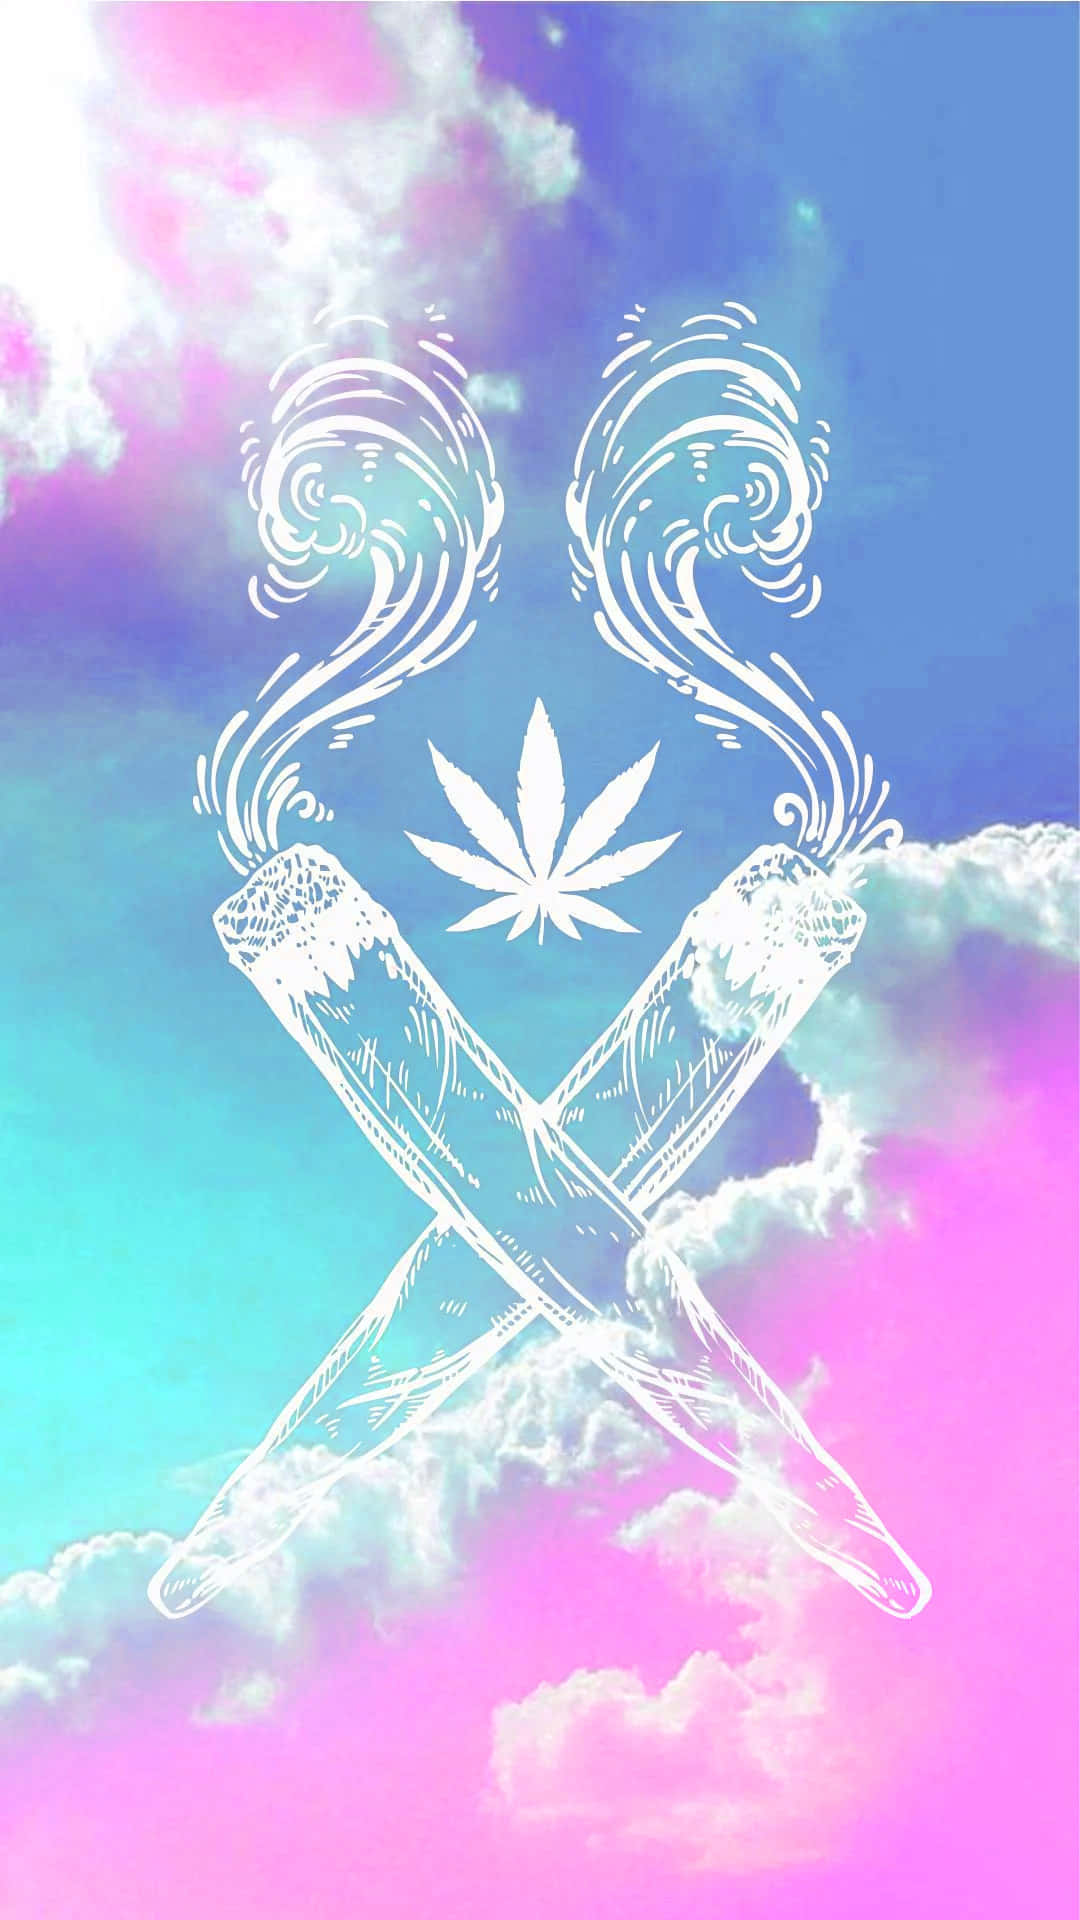 Trippy Aesthetic Cloud With Tobacco Print Wallpaper